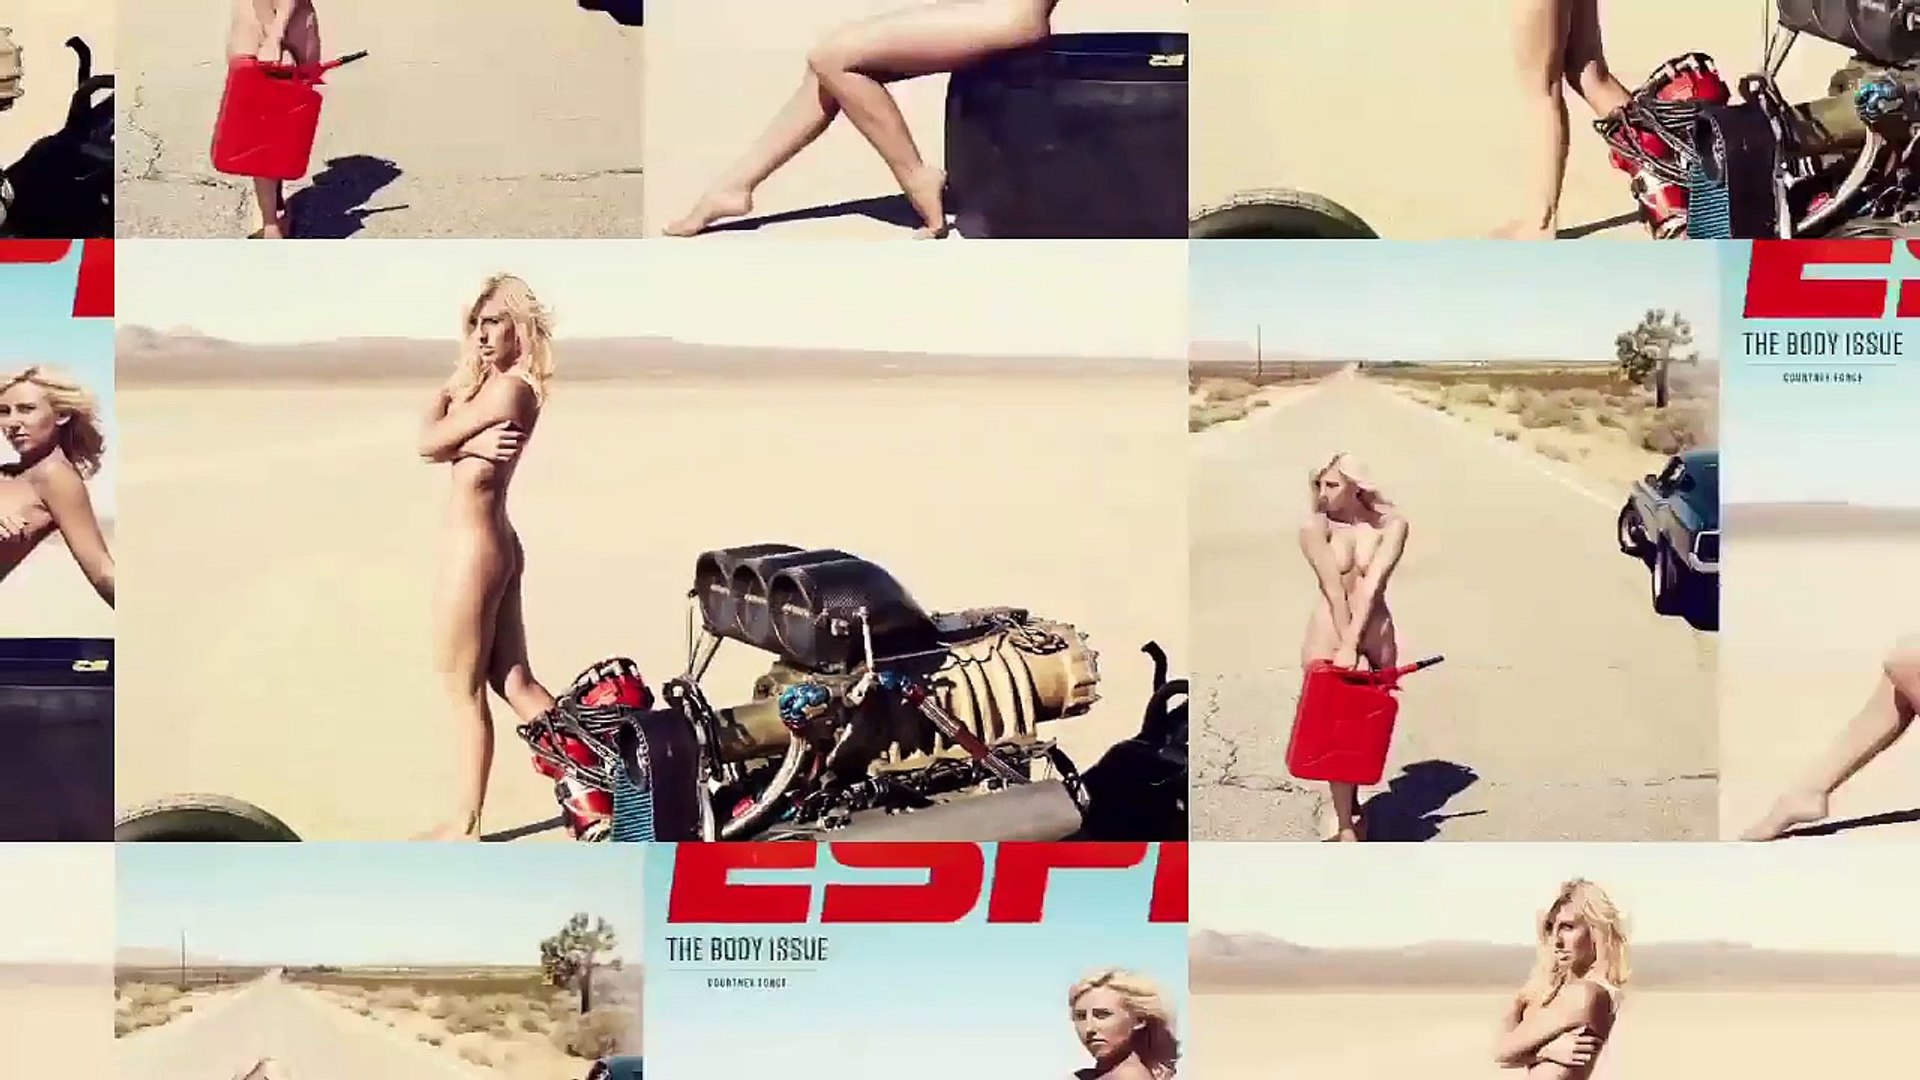 Courtney force nudes